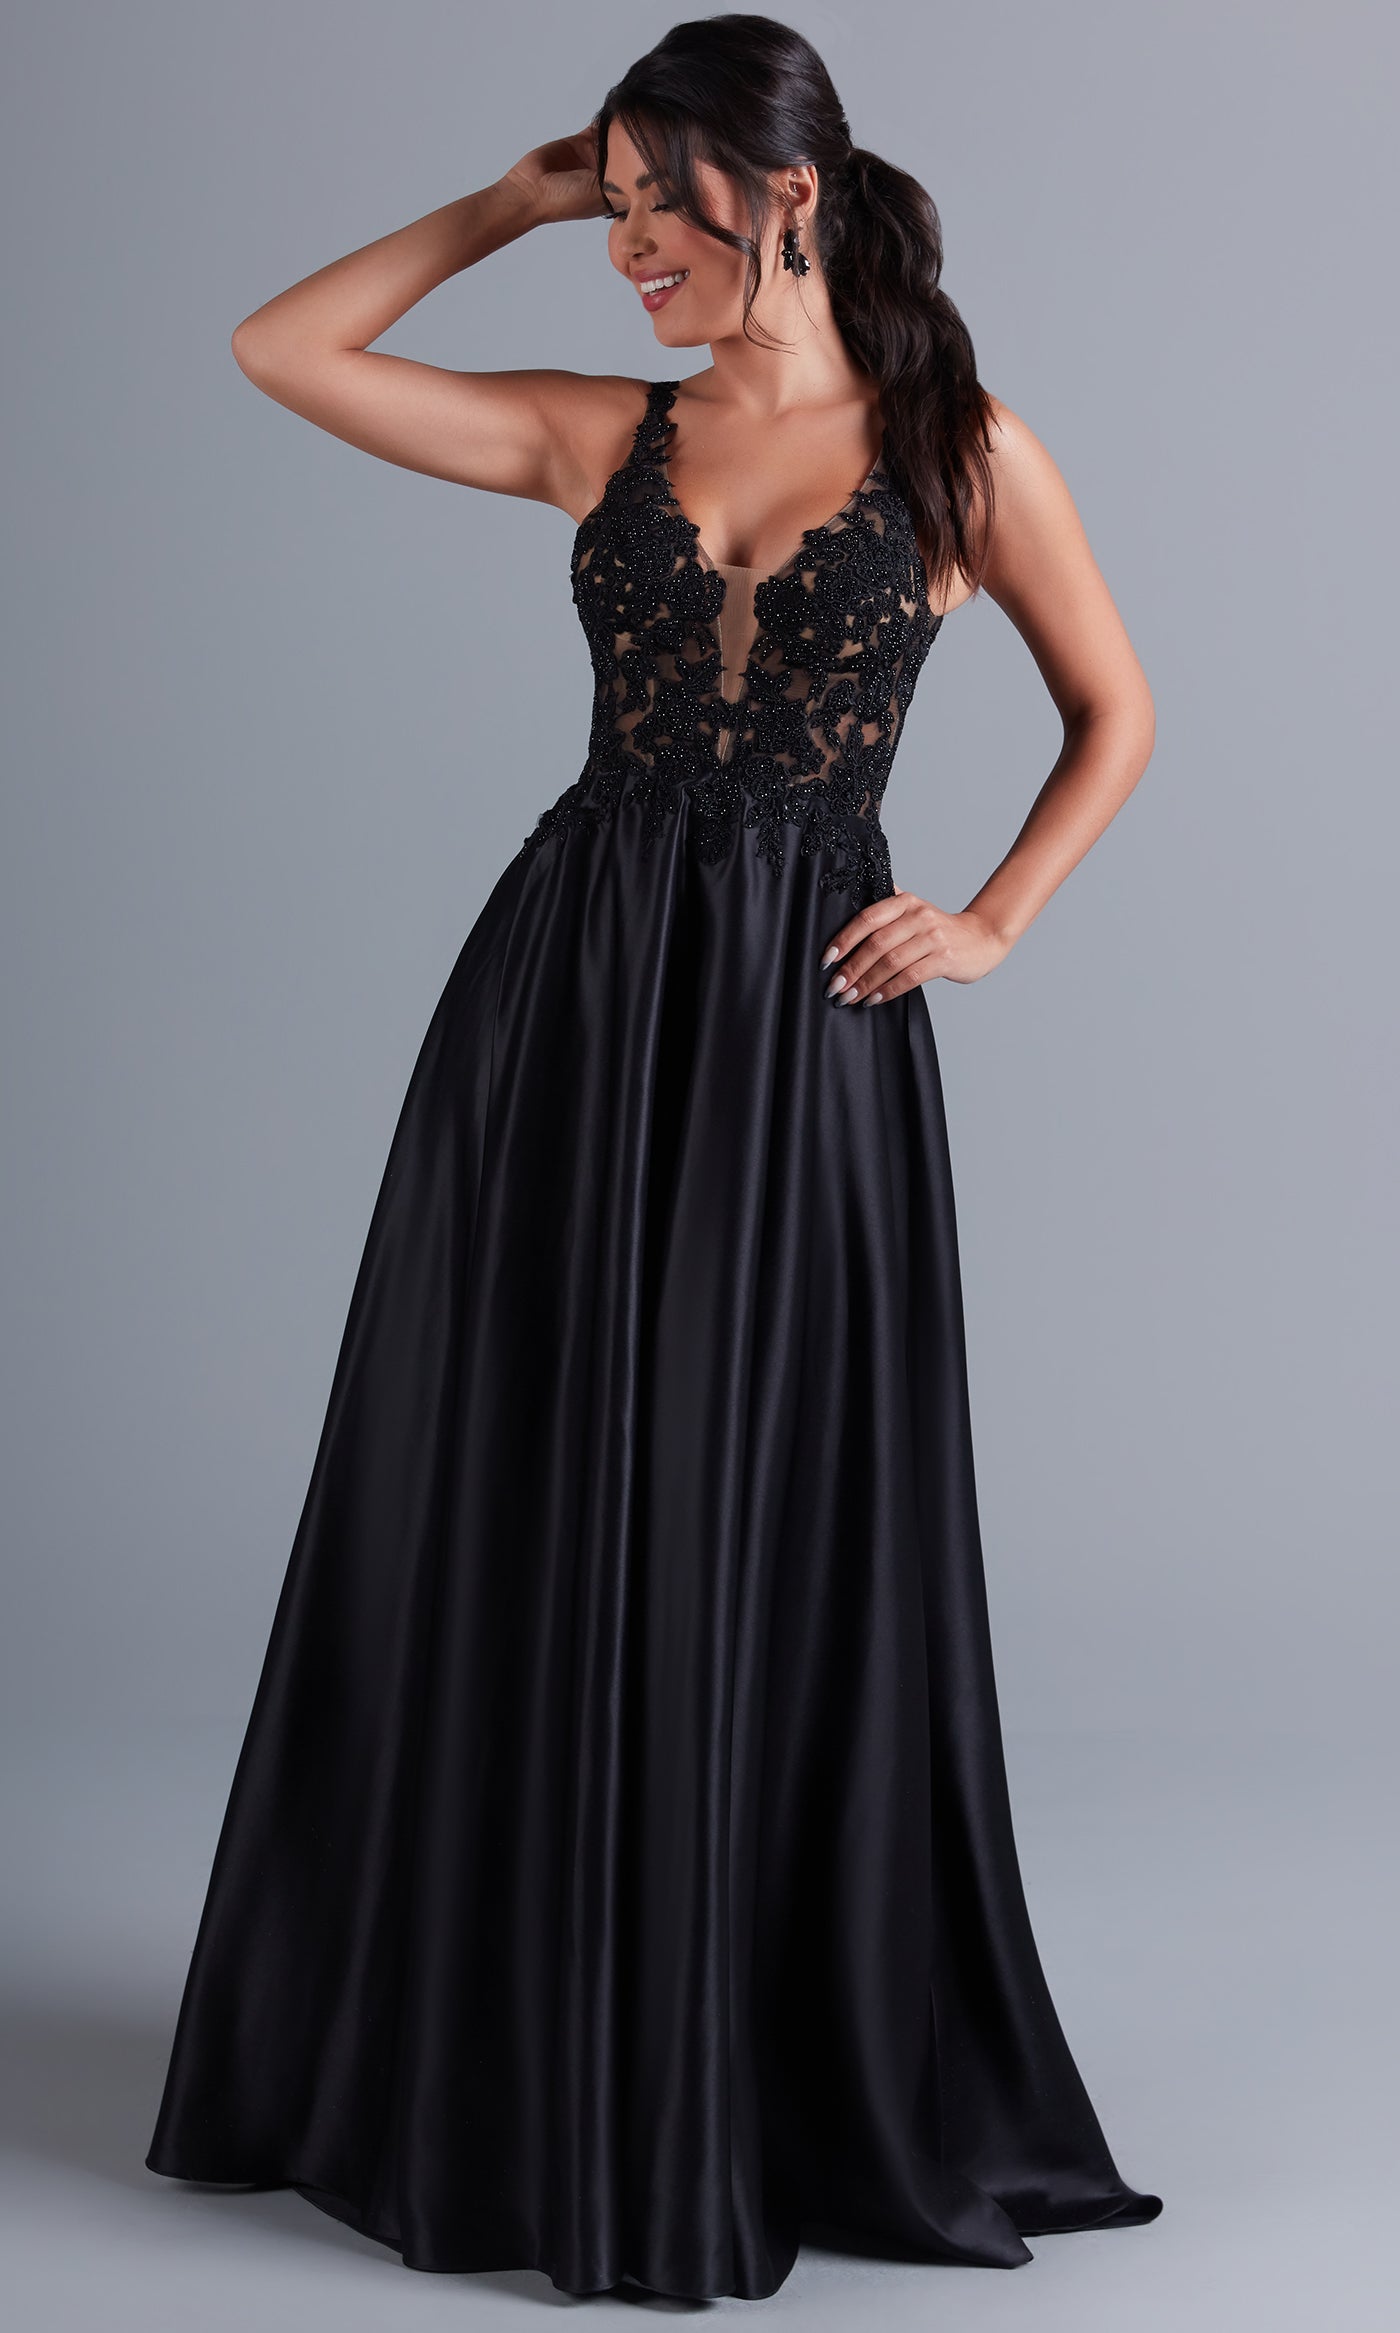 Black Long Black Formal Dress with Sheer Lace Bodice